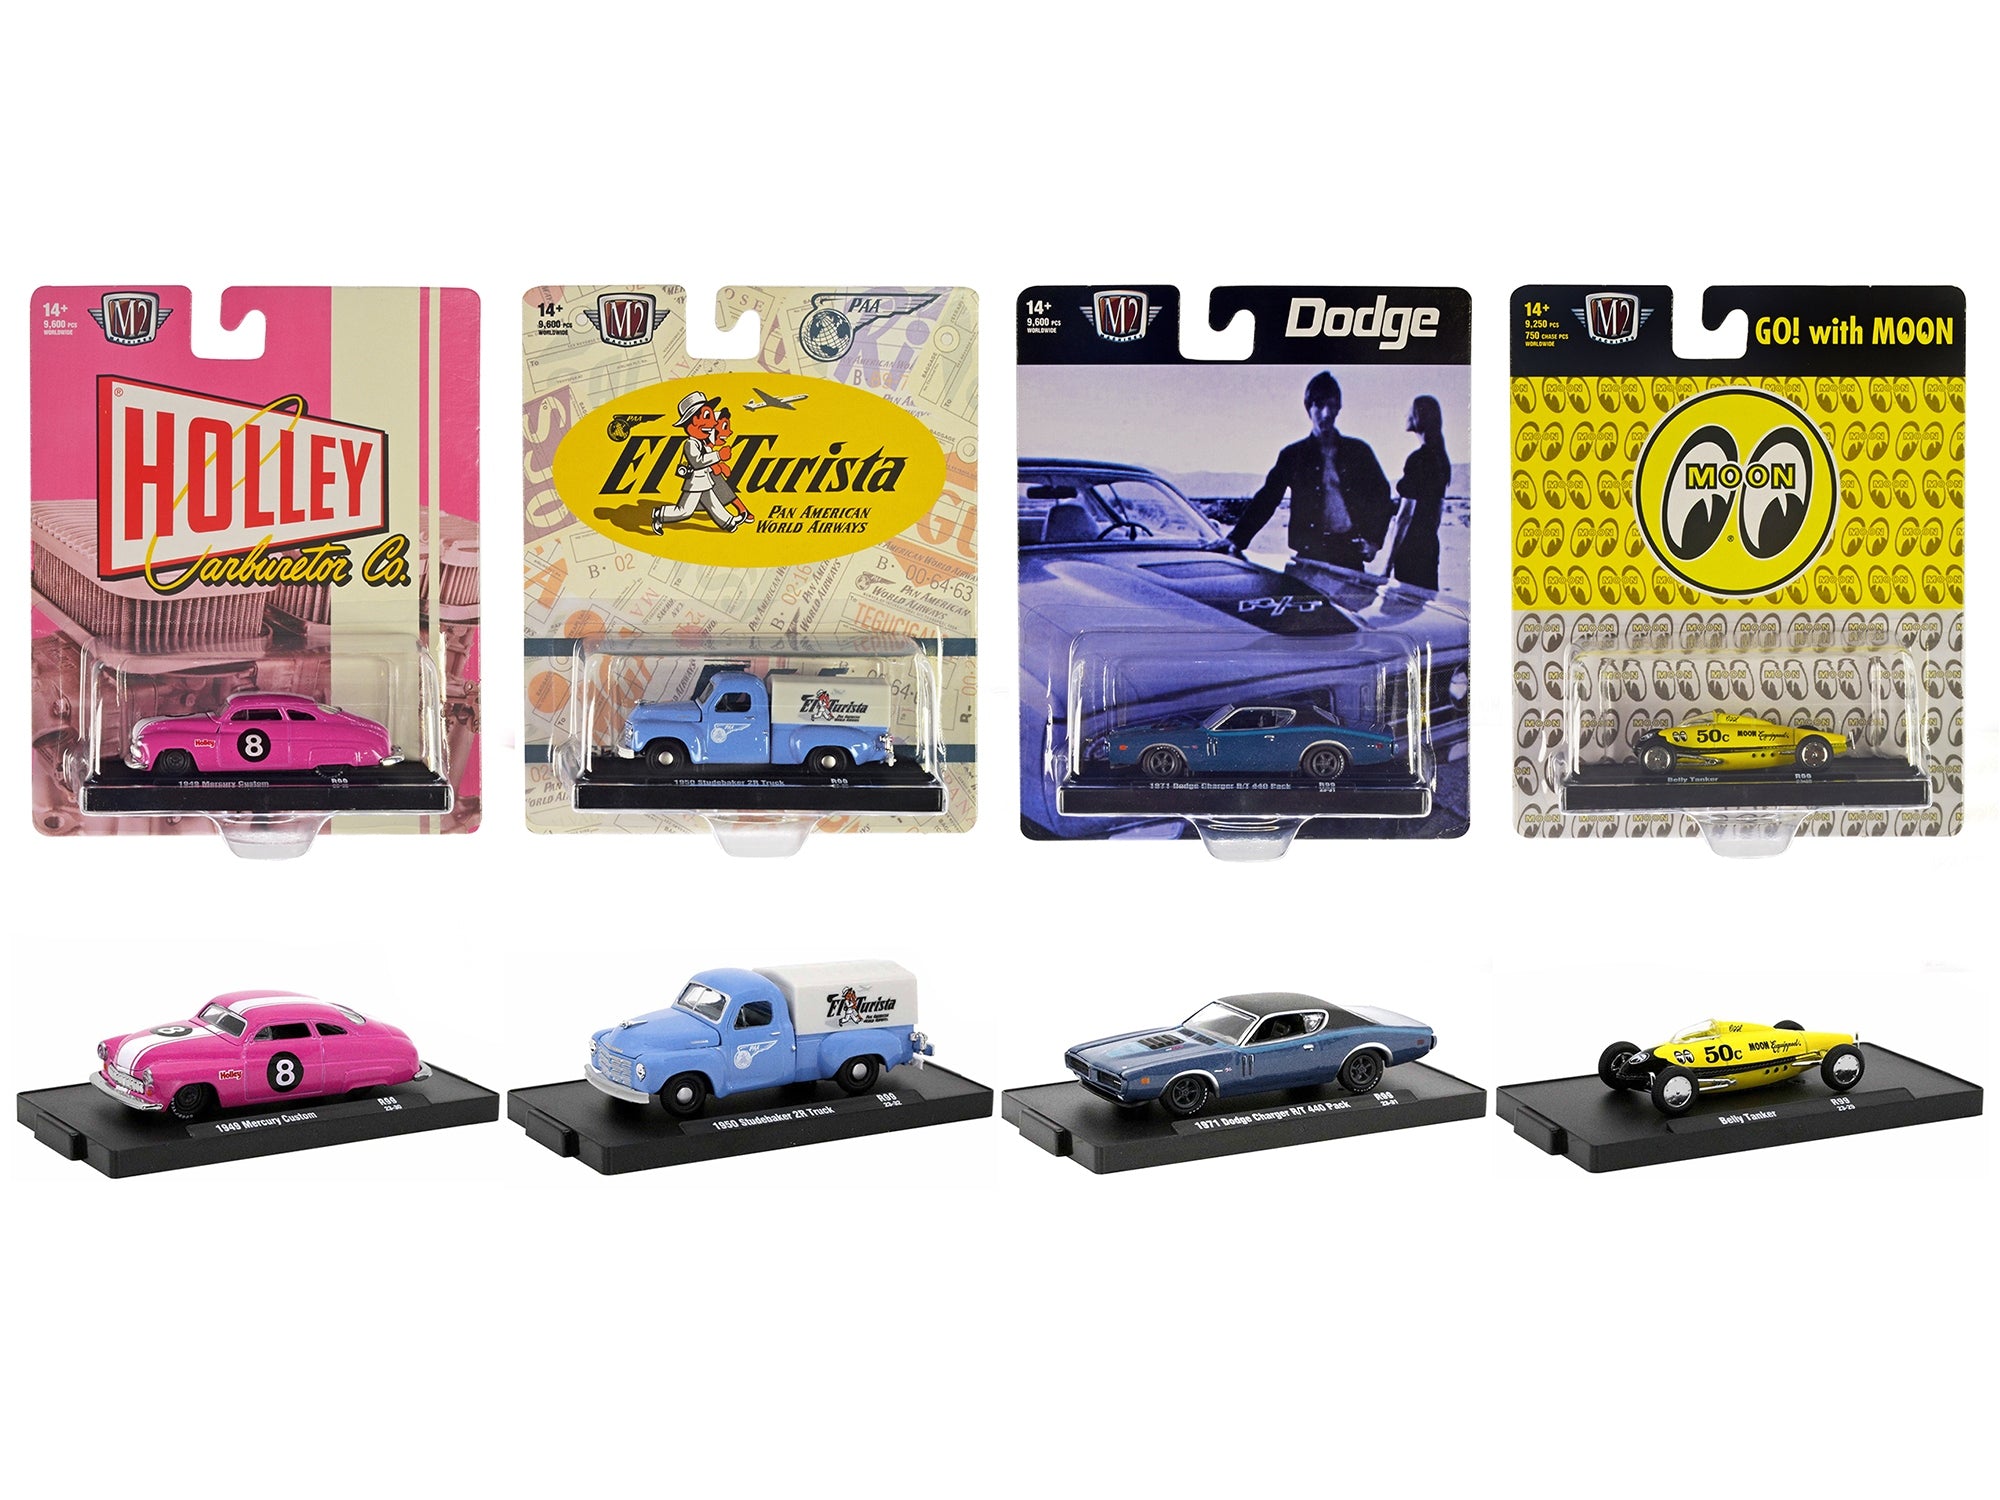 "Auto-Drivers" Set of 4 pieces in Blister Packs Release 99 Limited Edition to 9600 pieces Worldwide 1/64 Diecast Model Cars by M2 Machines